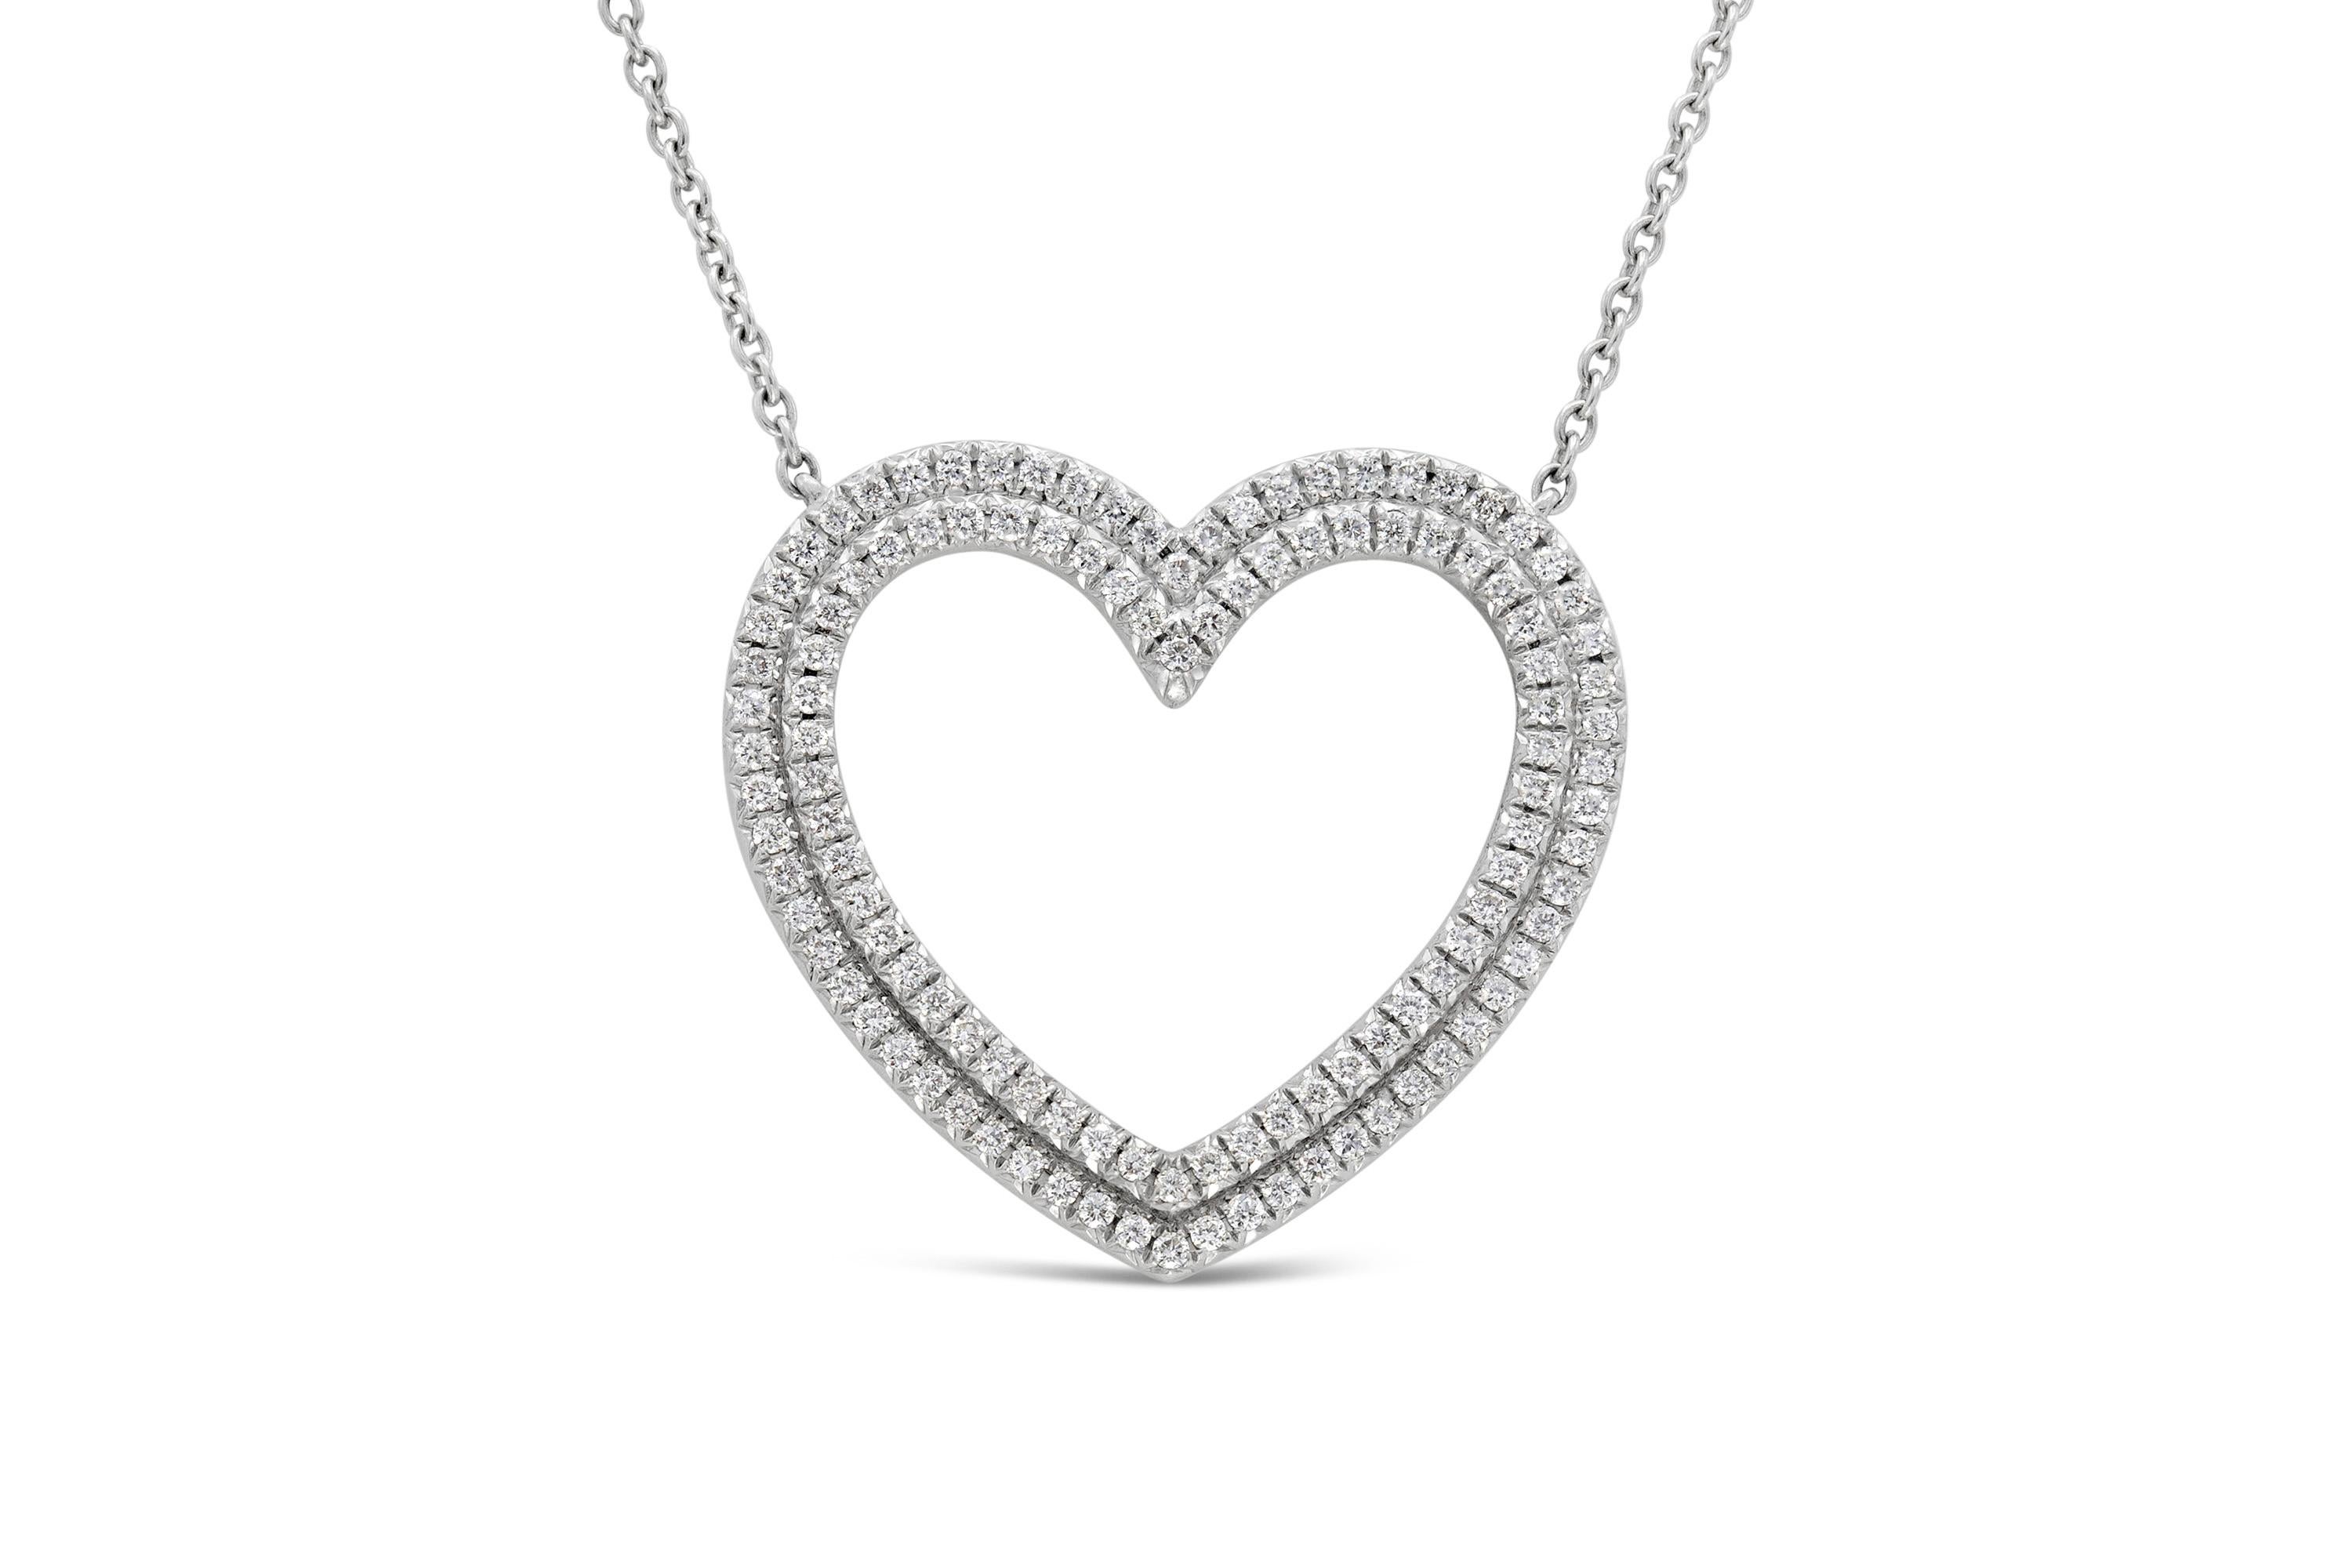 Finely crafted in platinum with 1.00 carats of Round Brilliant cut diamonds.
Signed by Tiffany & Co.
19.5 inches long